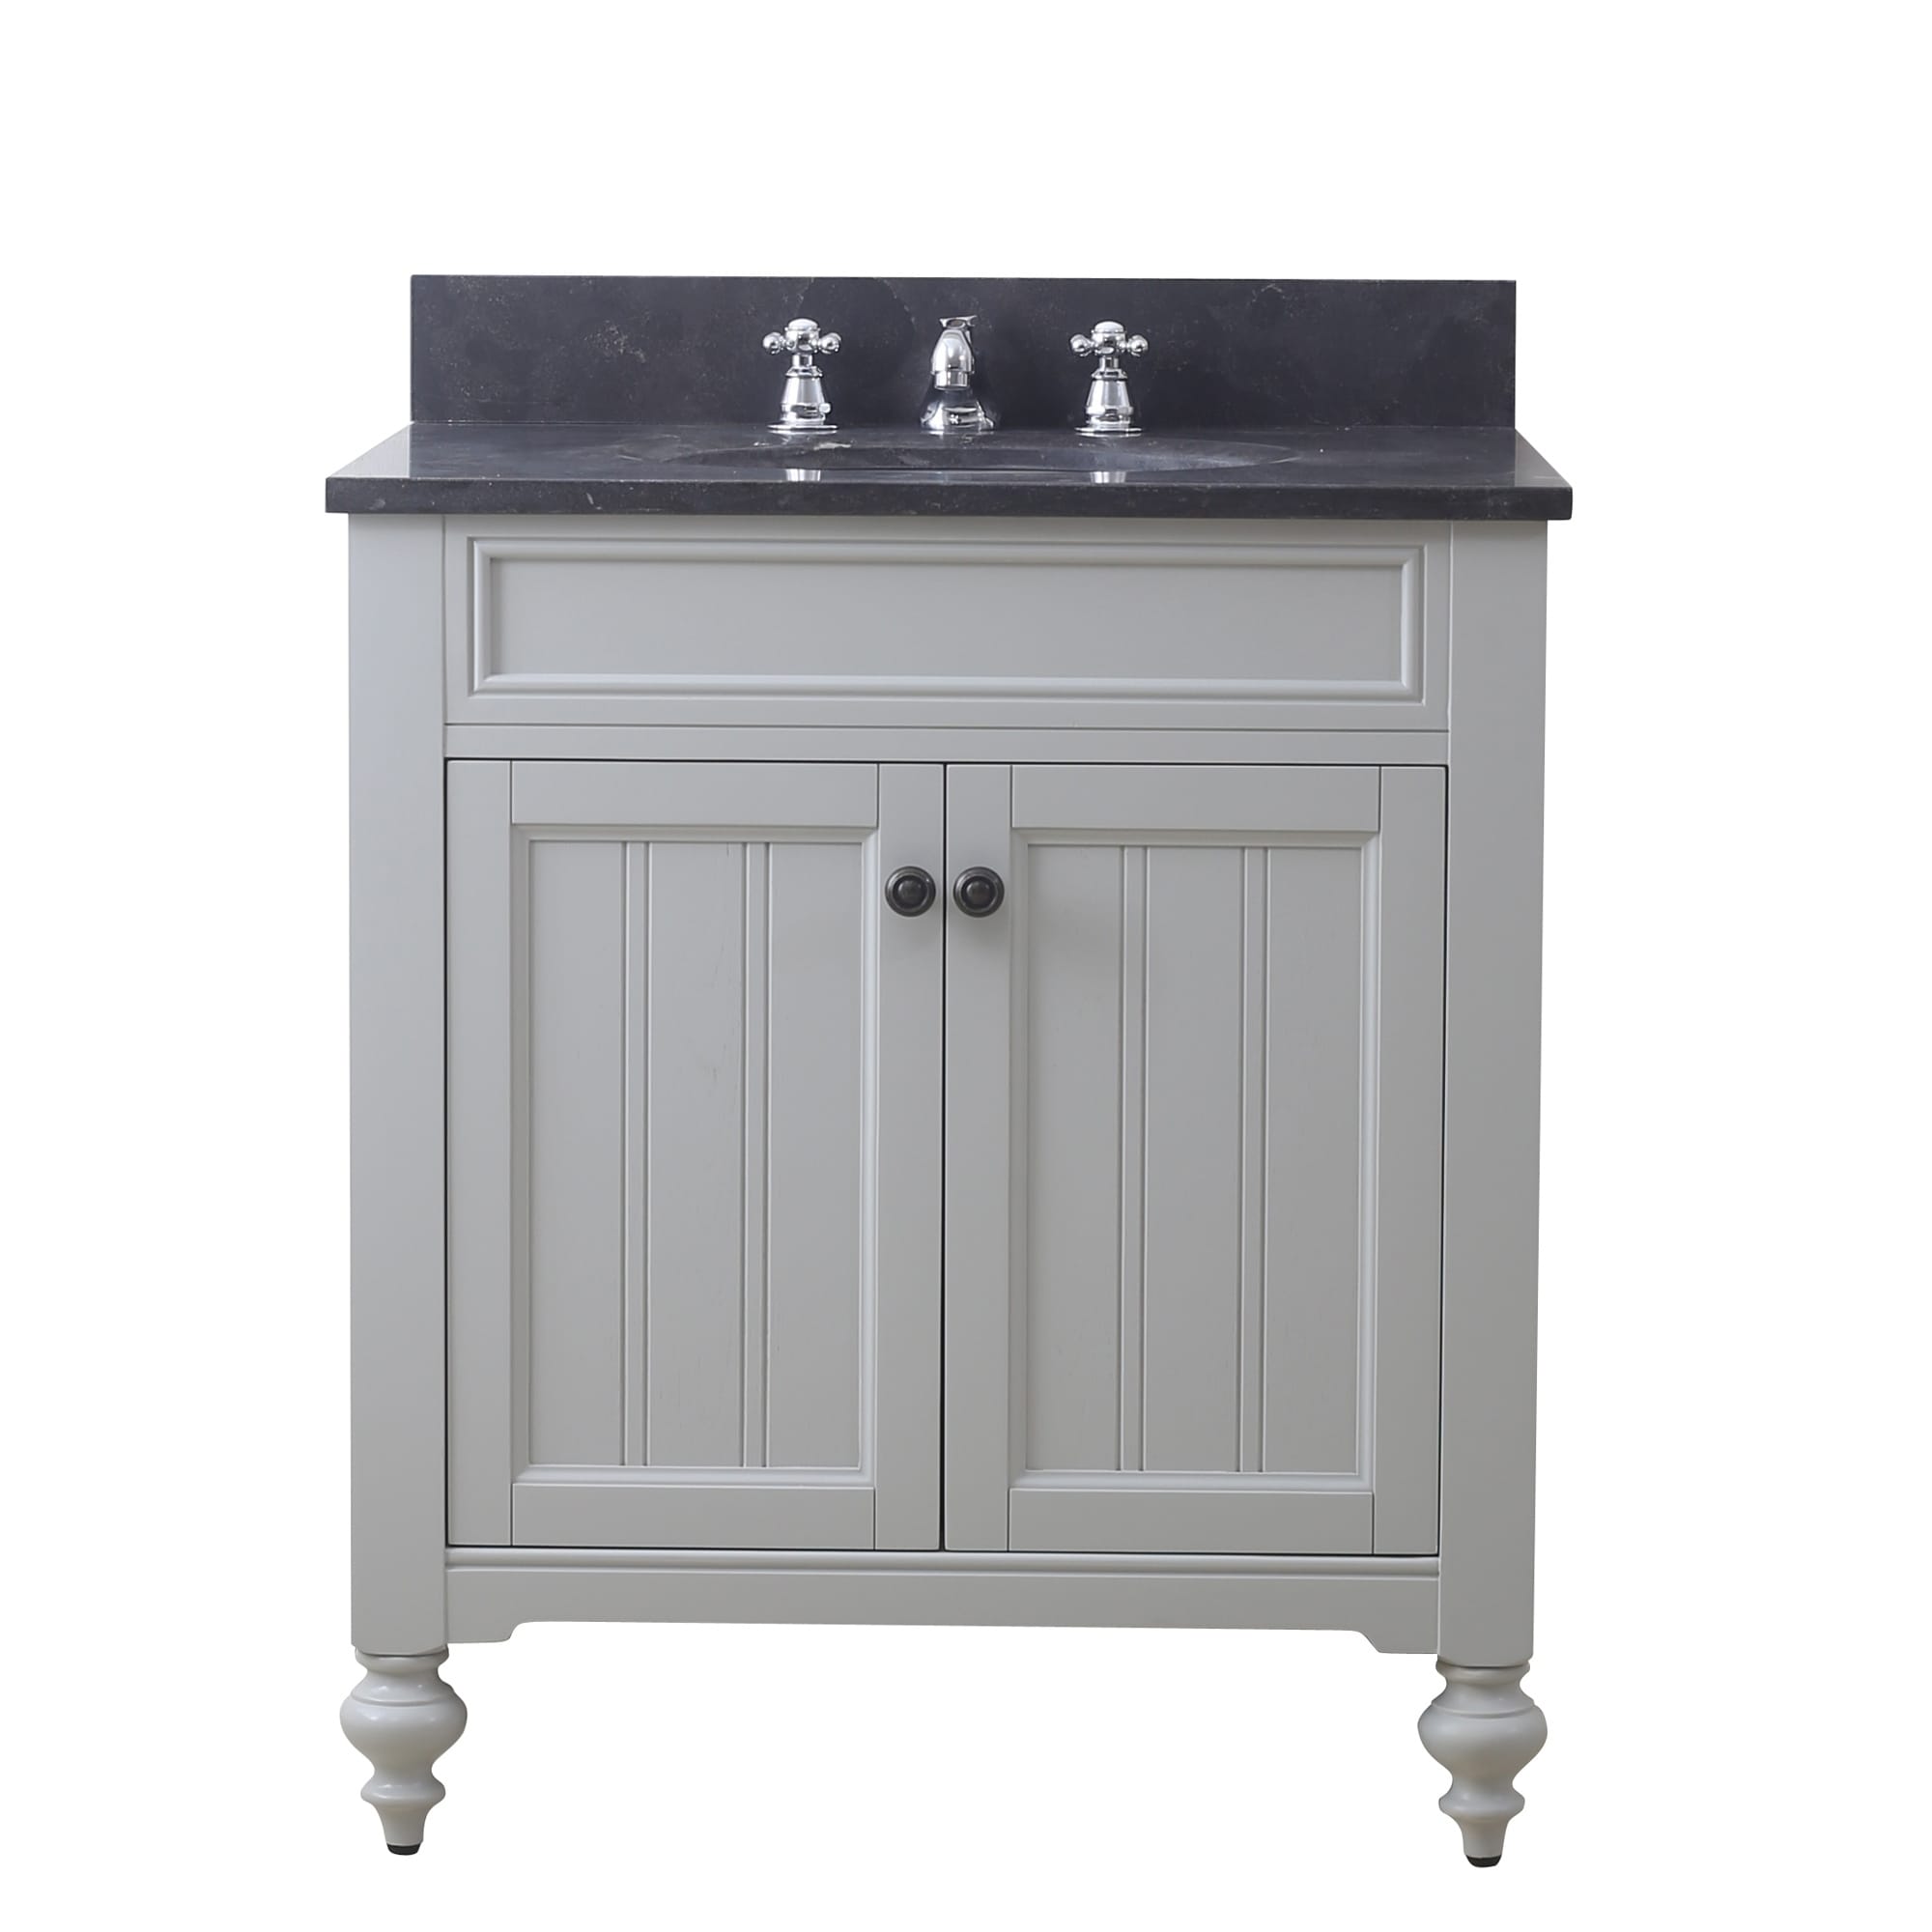 30 Inch Earl Grey Single Sink Bathroom Vanity From The Potenza Collection On Sale Overstock 22379365 Vanity Only